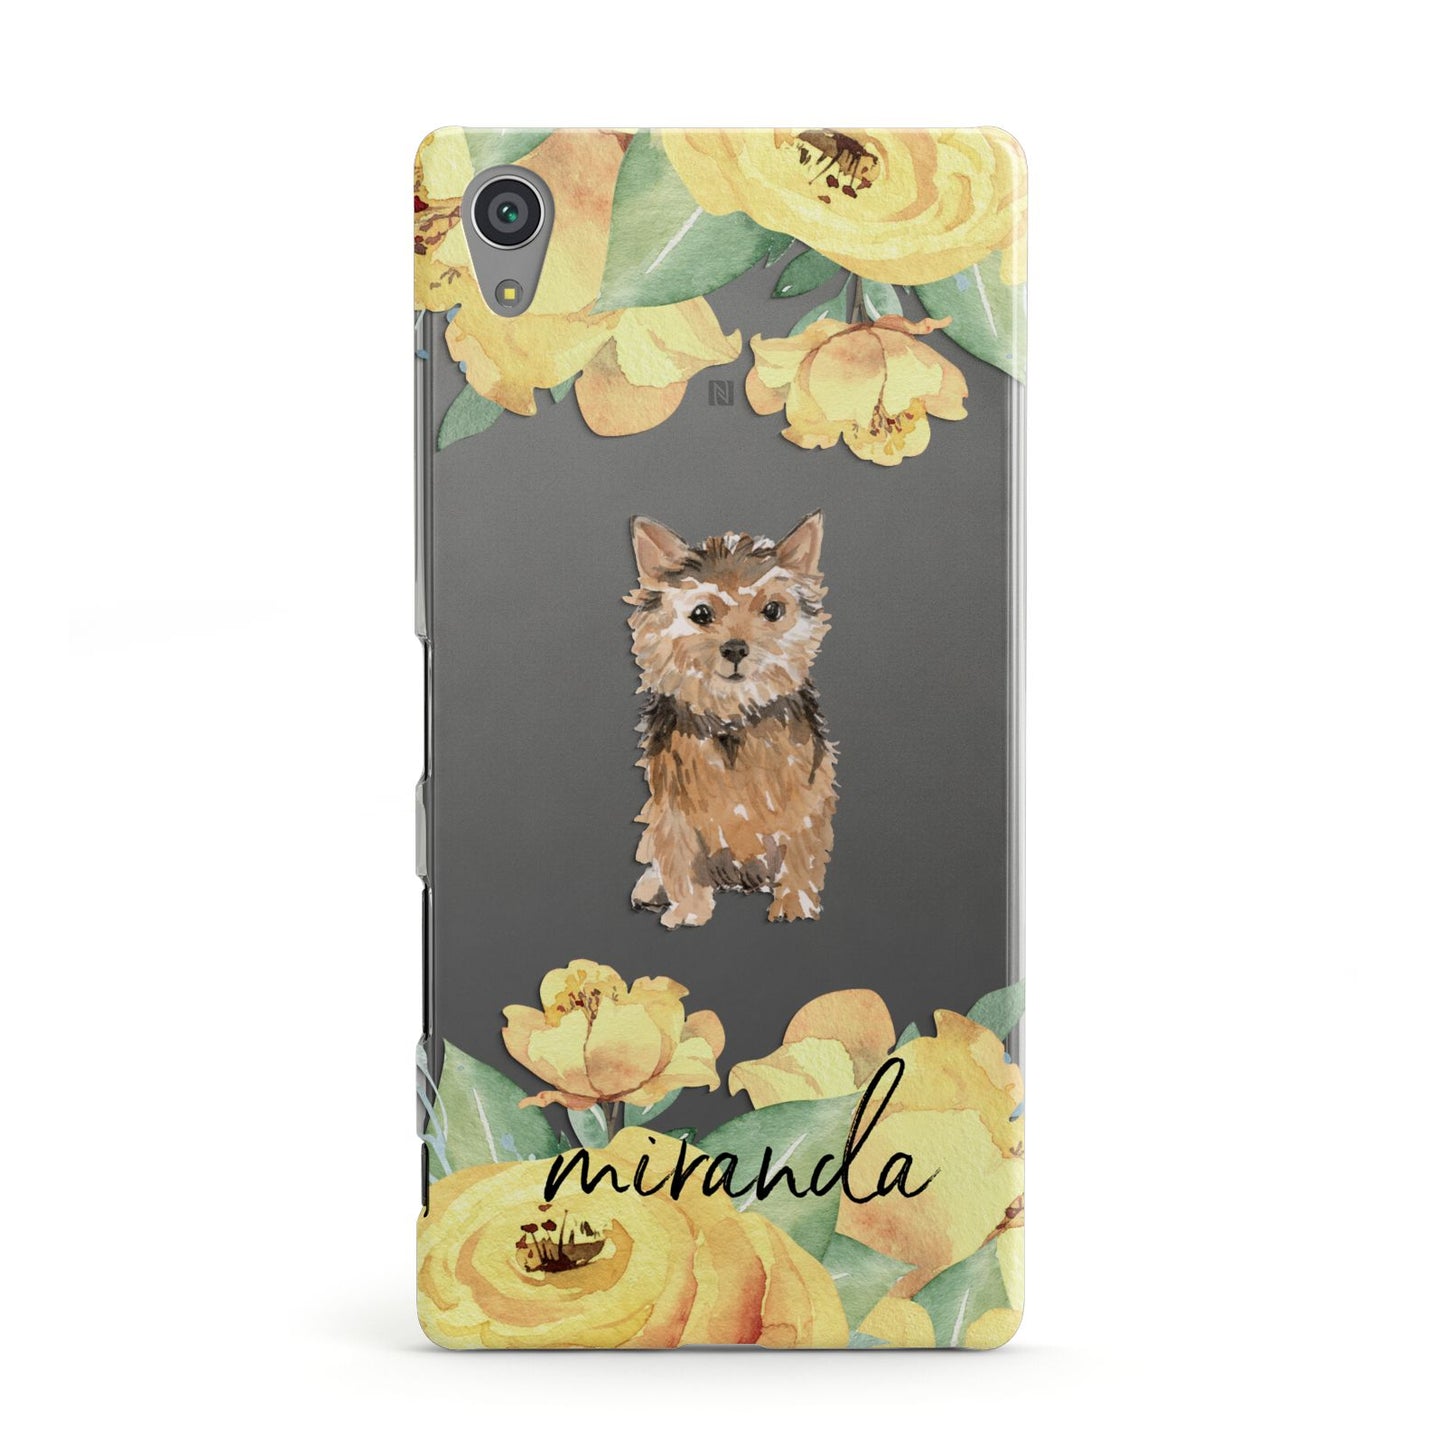 Personalised Norwich Terrier Sony Xperia Case